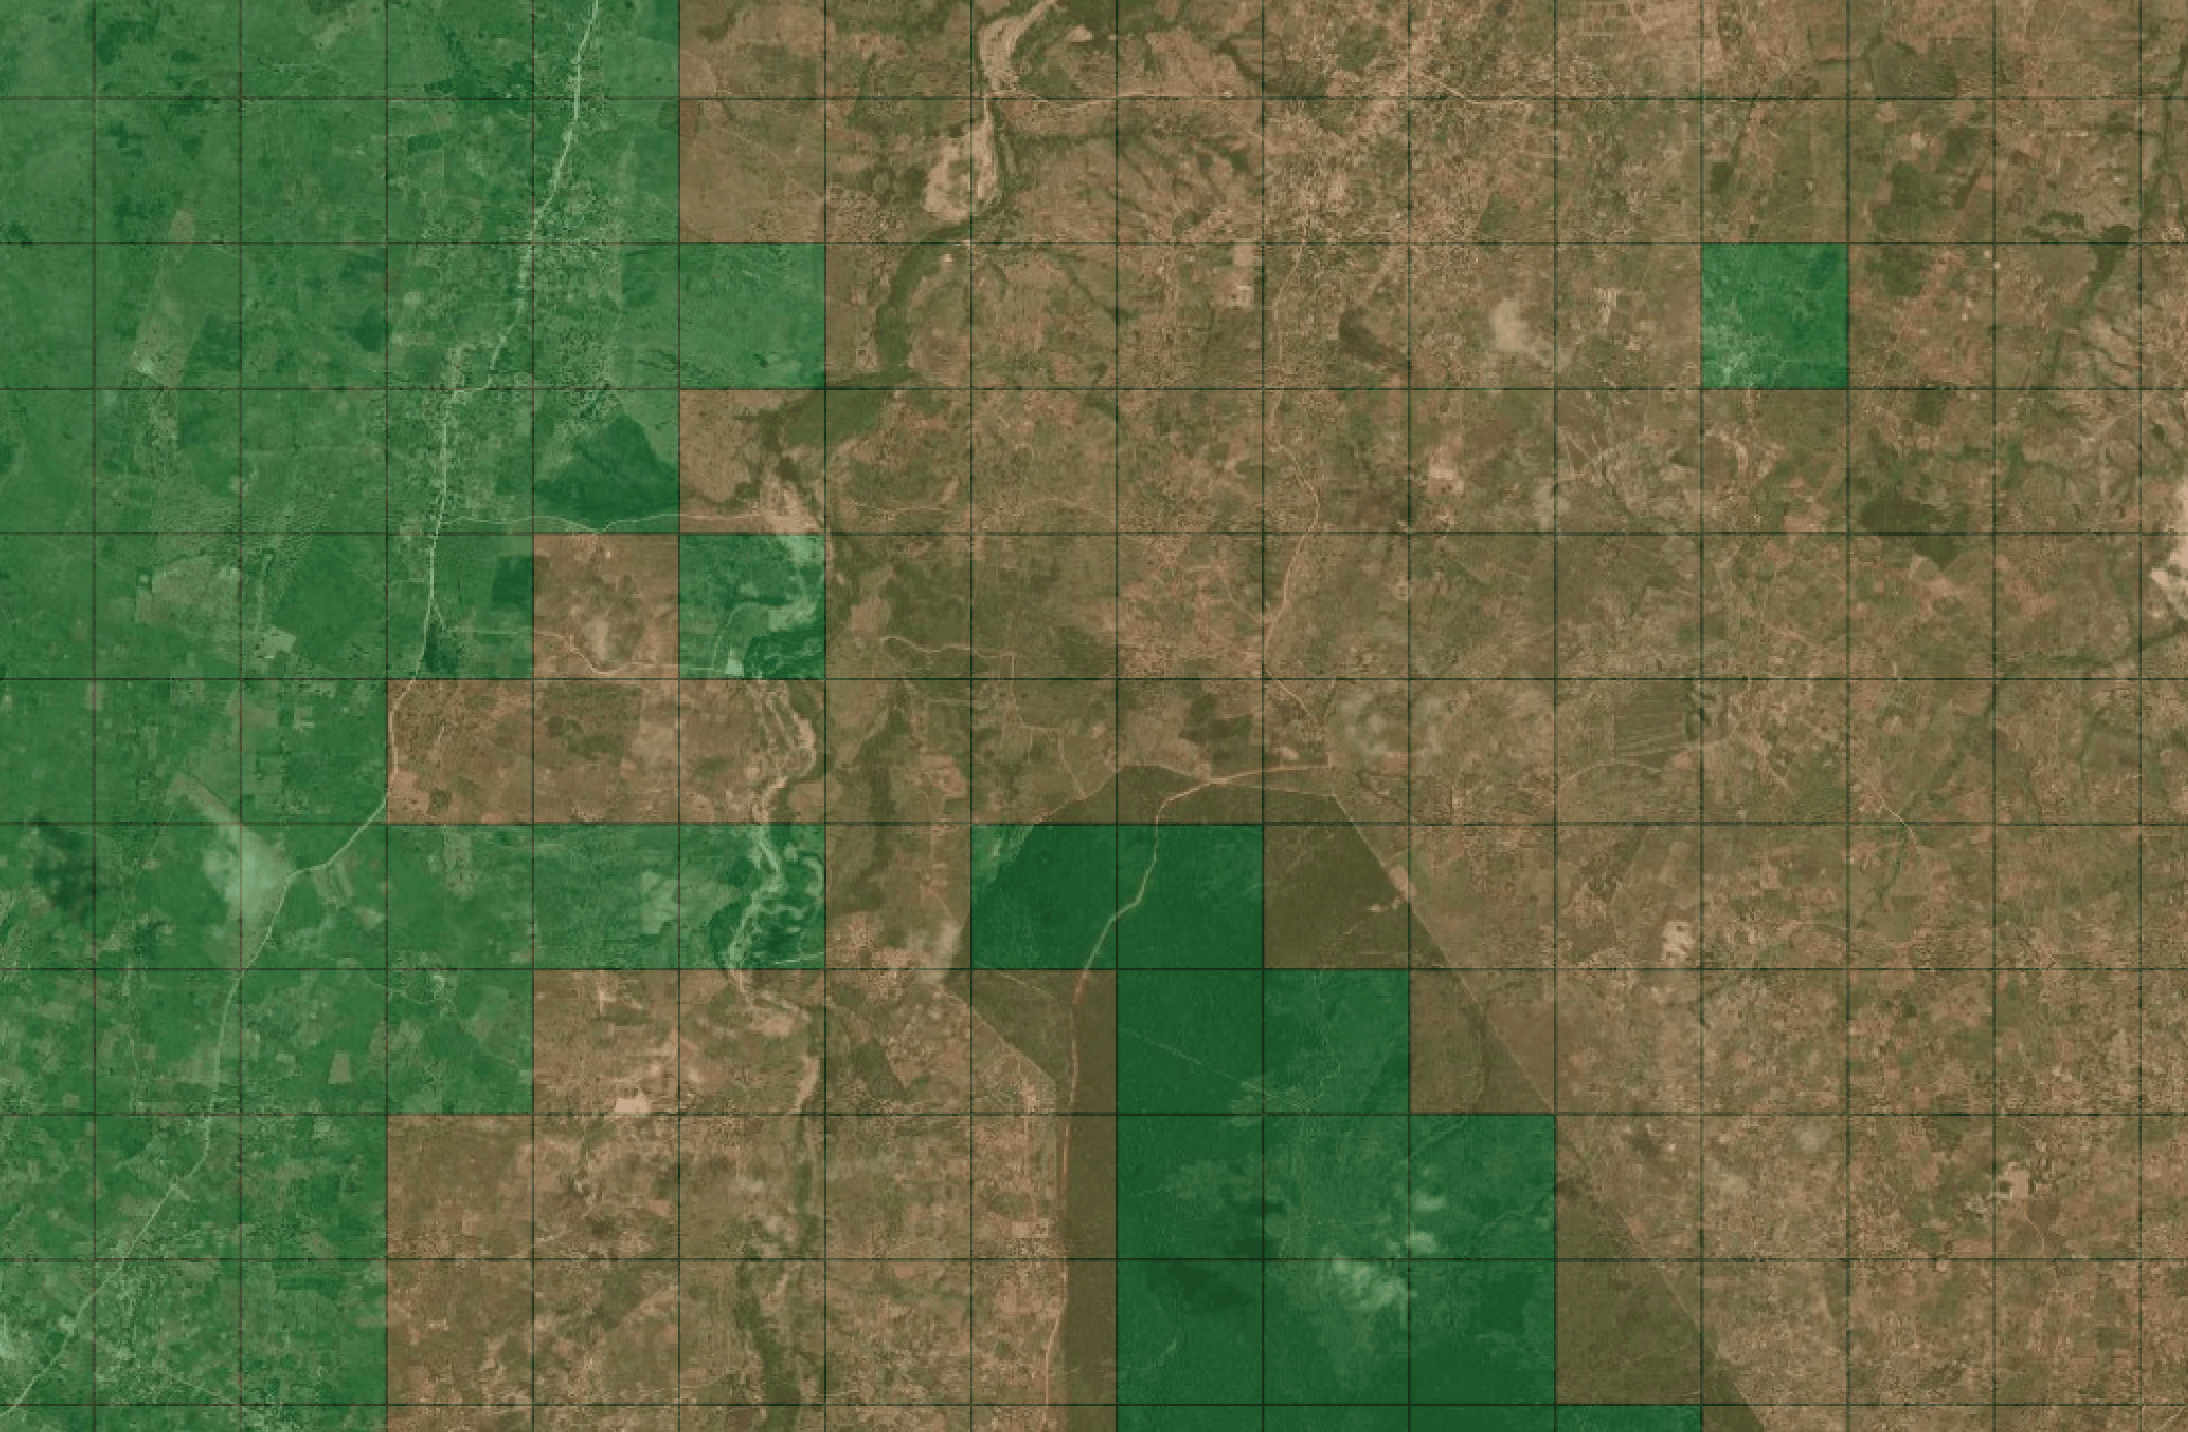 example classification image overlaid over satellite imagery